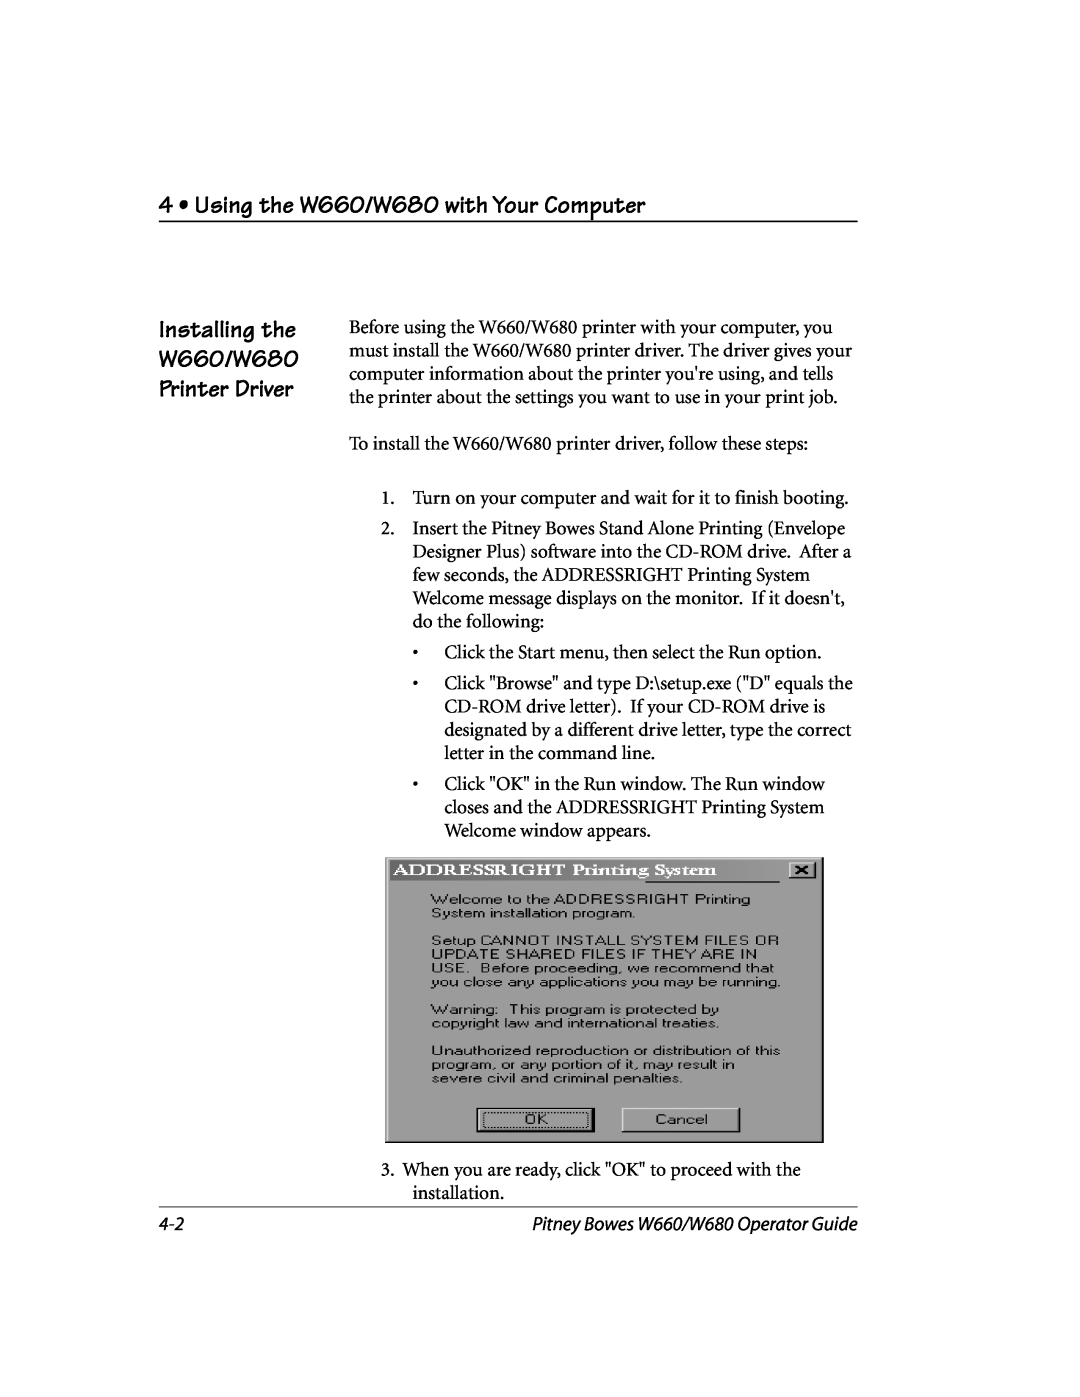 Pitney Bowes manual Using the W660/W680 with Your Computer, Installing the W660/W680 Printer Driver 